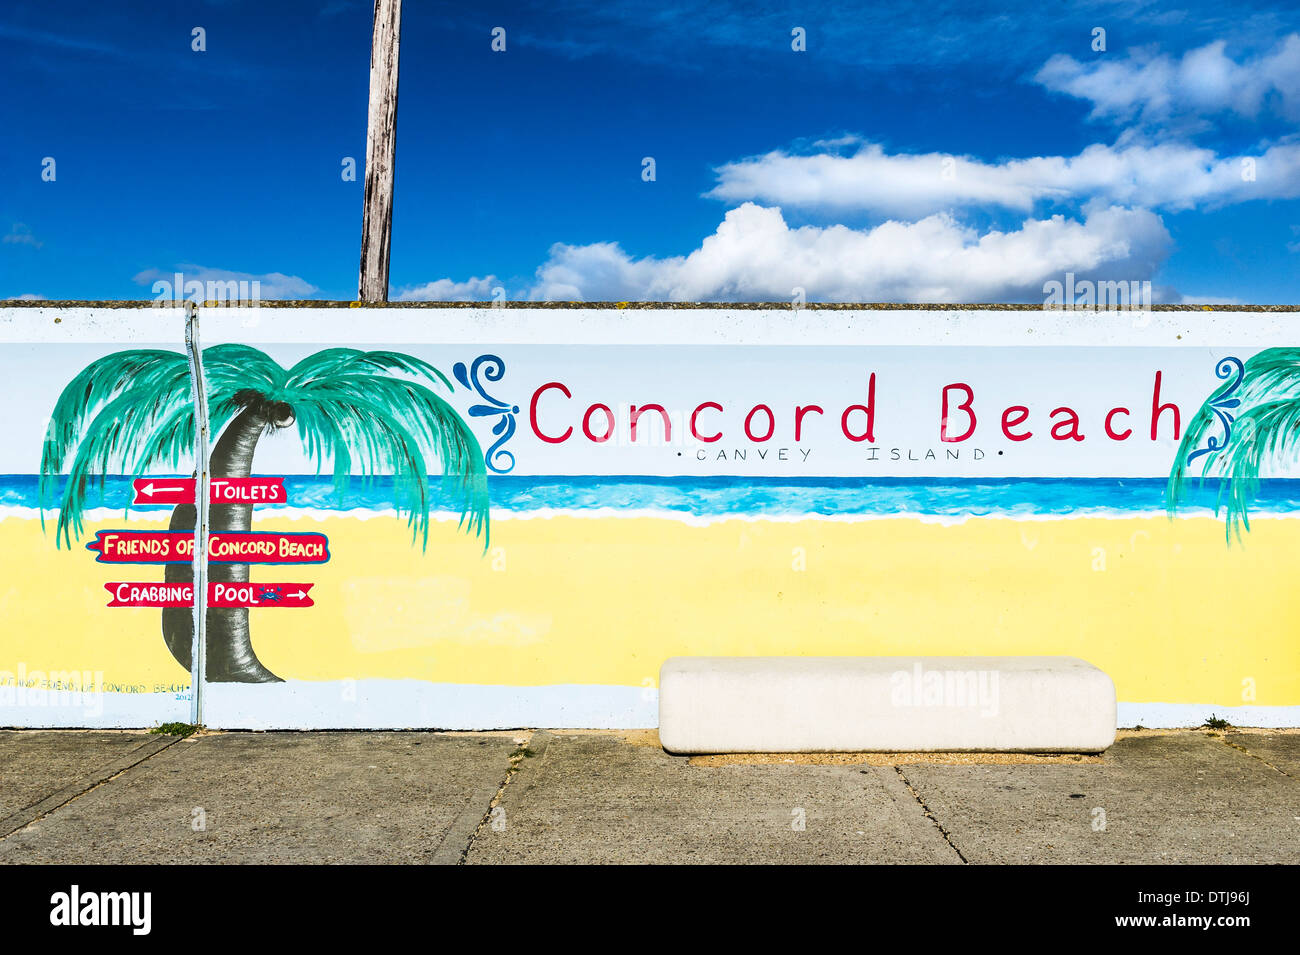 Canvey Island - A colourful mural painted on the sea wall flood defence at Concord Beach on Canvey Island in Essex. Stock Photo